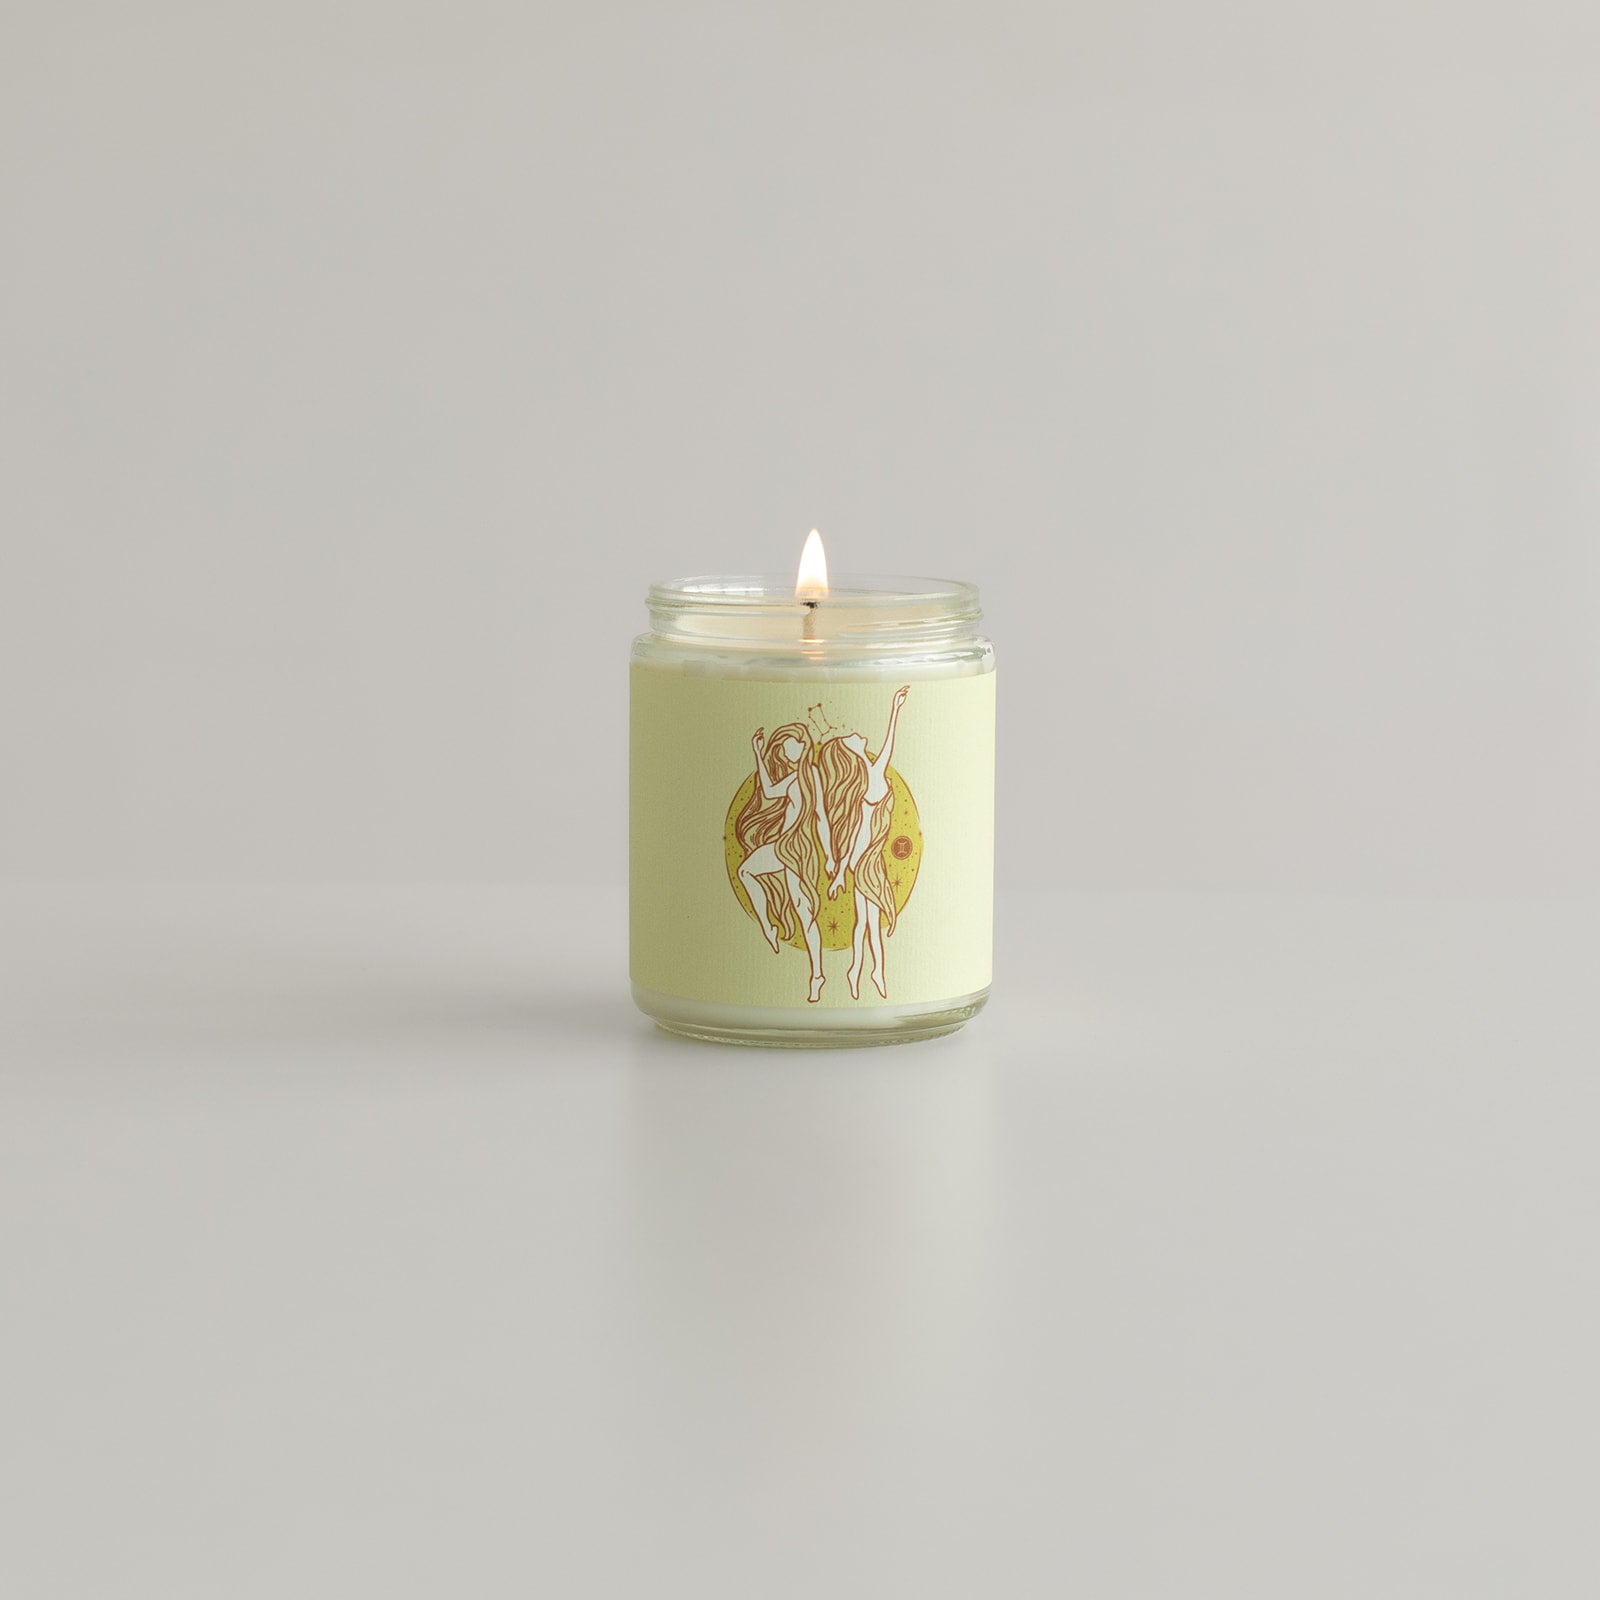 gemini season astrology candle with the twins on the label in a candle jar